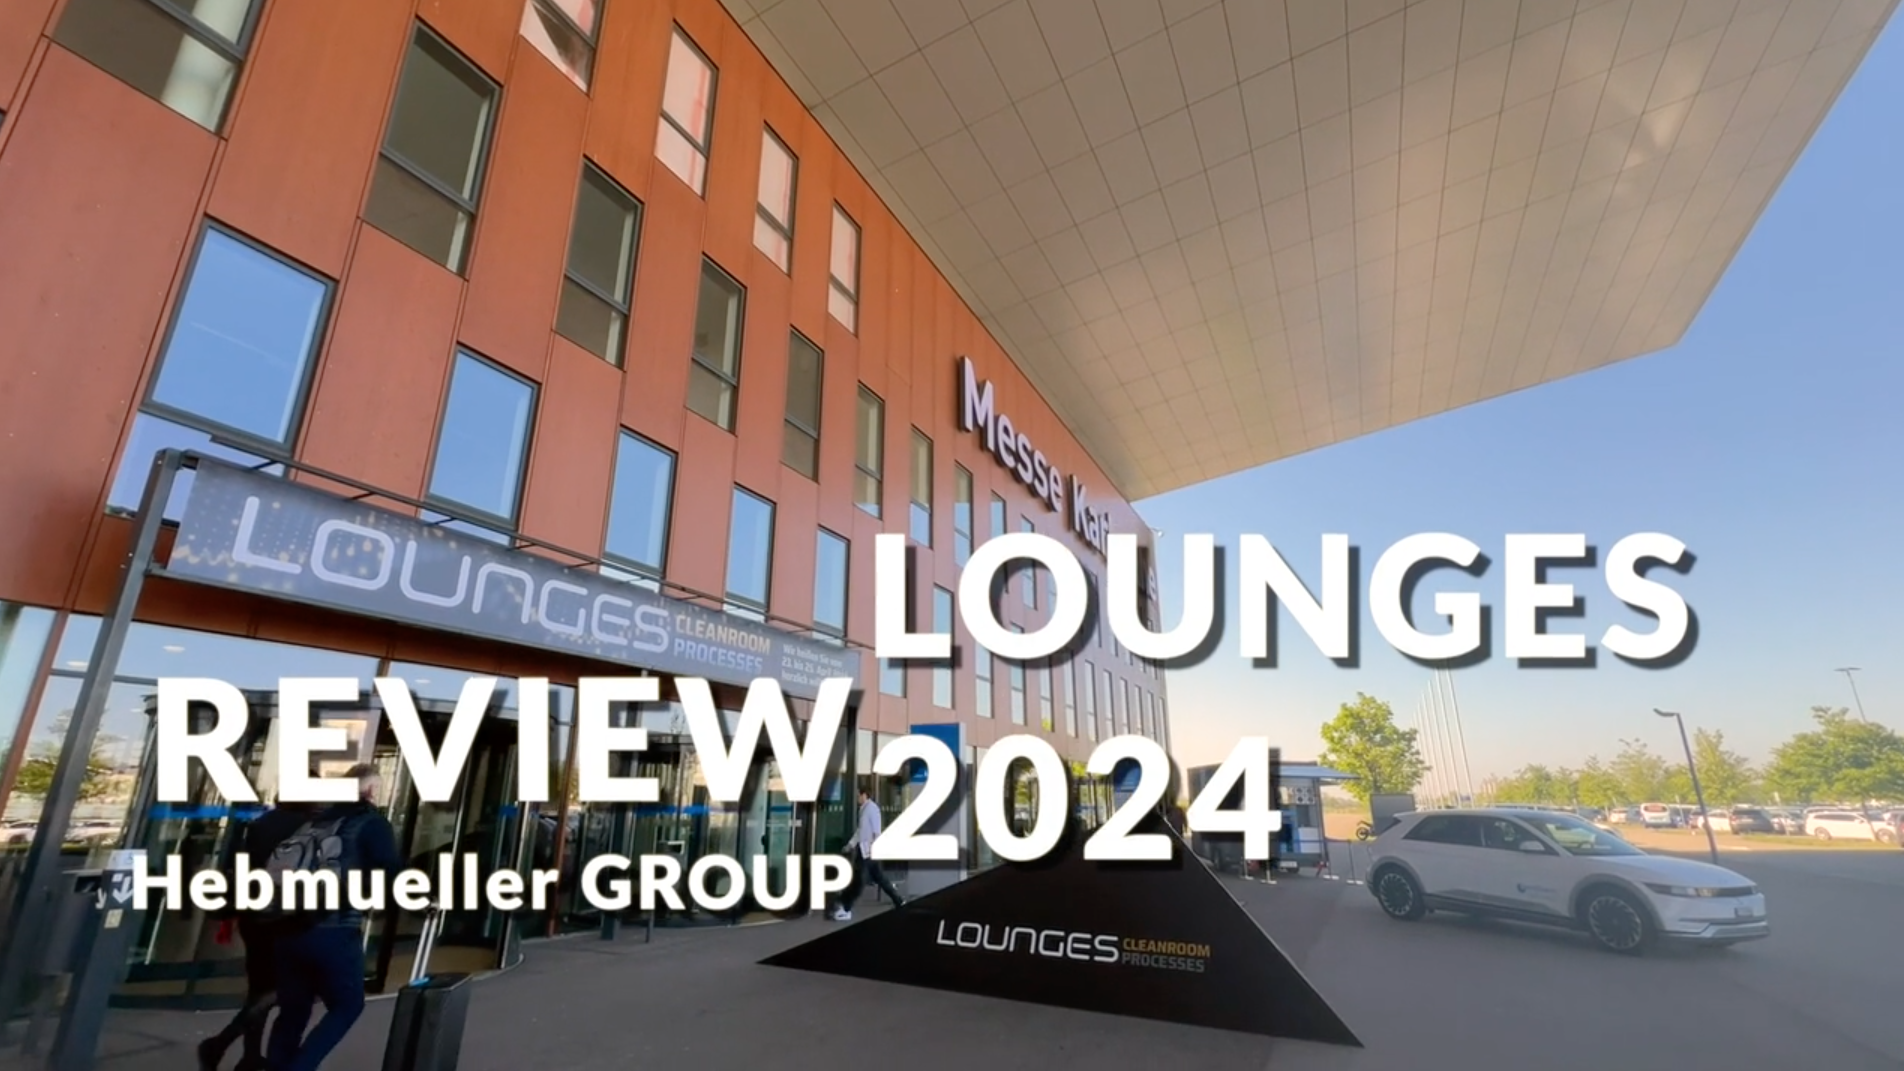 Hebmueller GROUP Video Review der LOUNGES Cleanroom Processes 2024